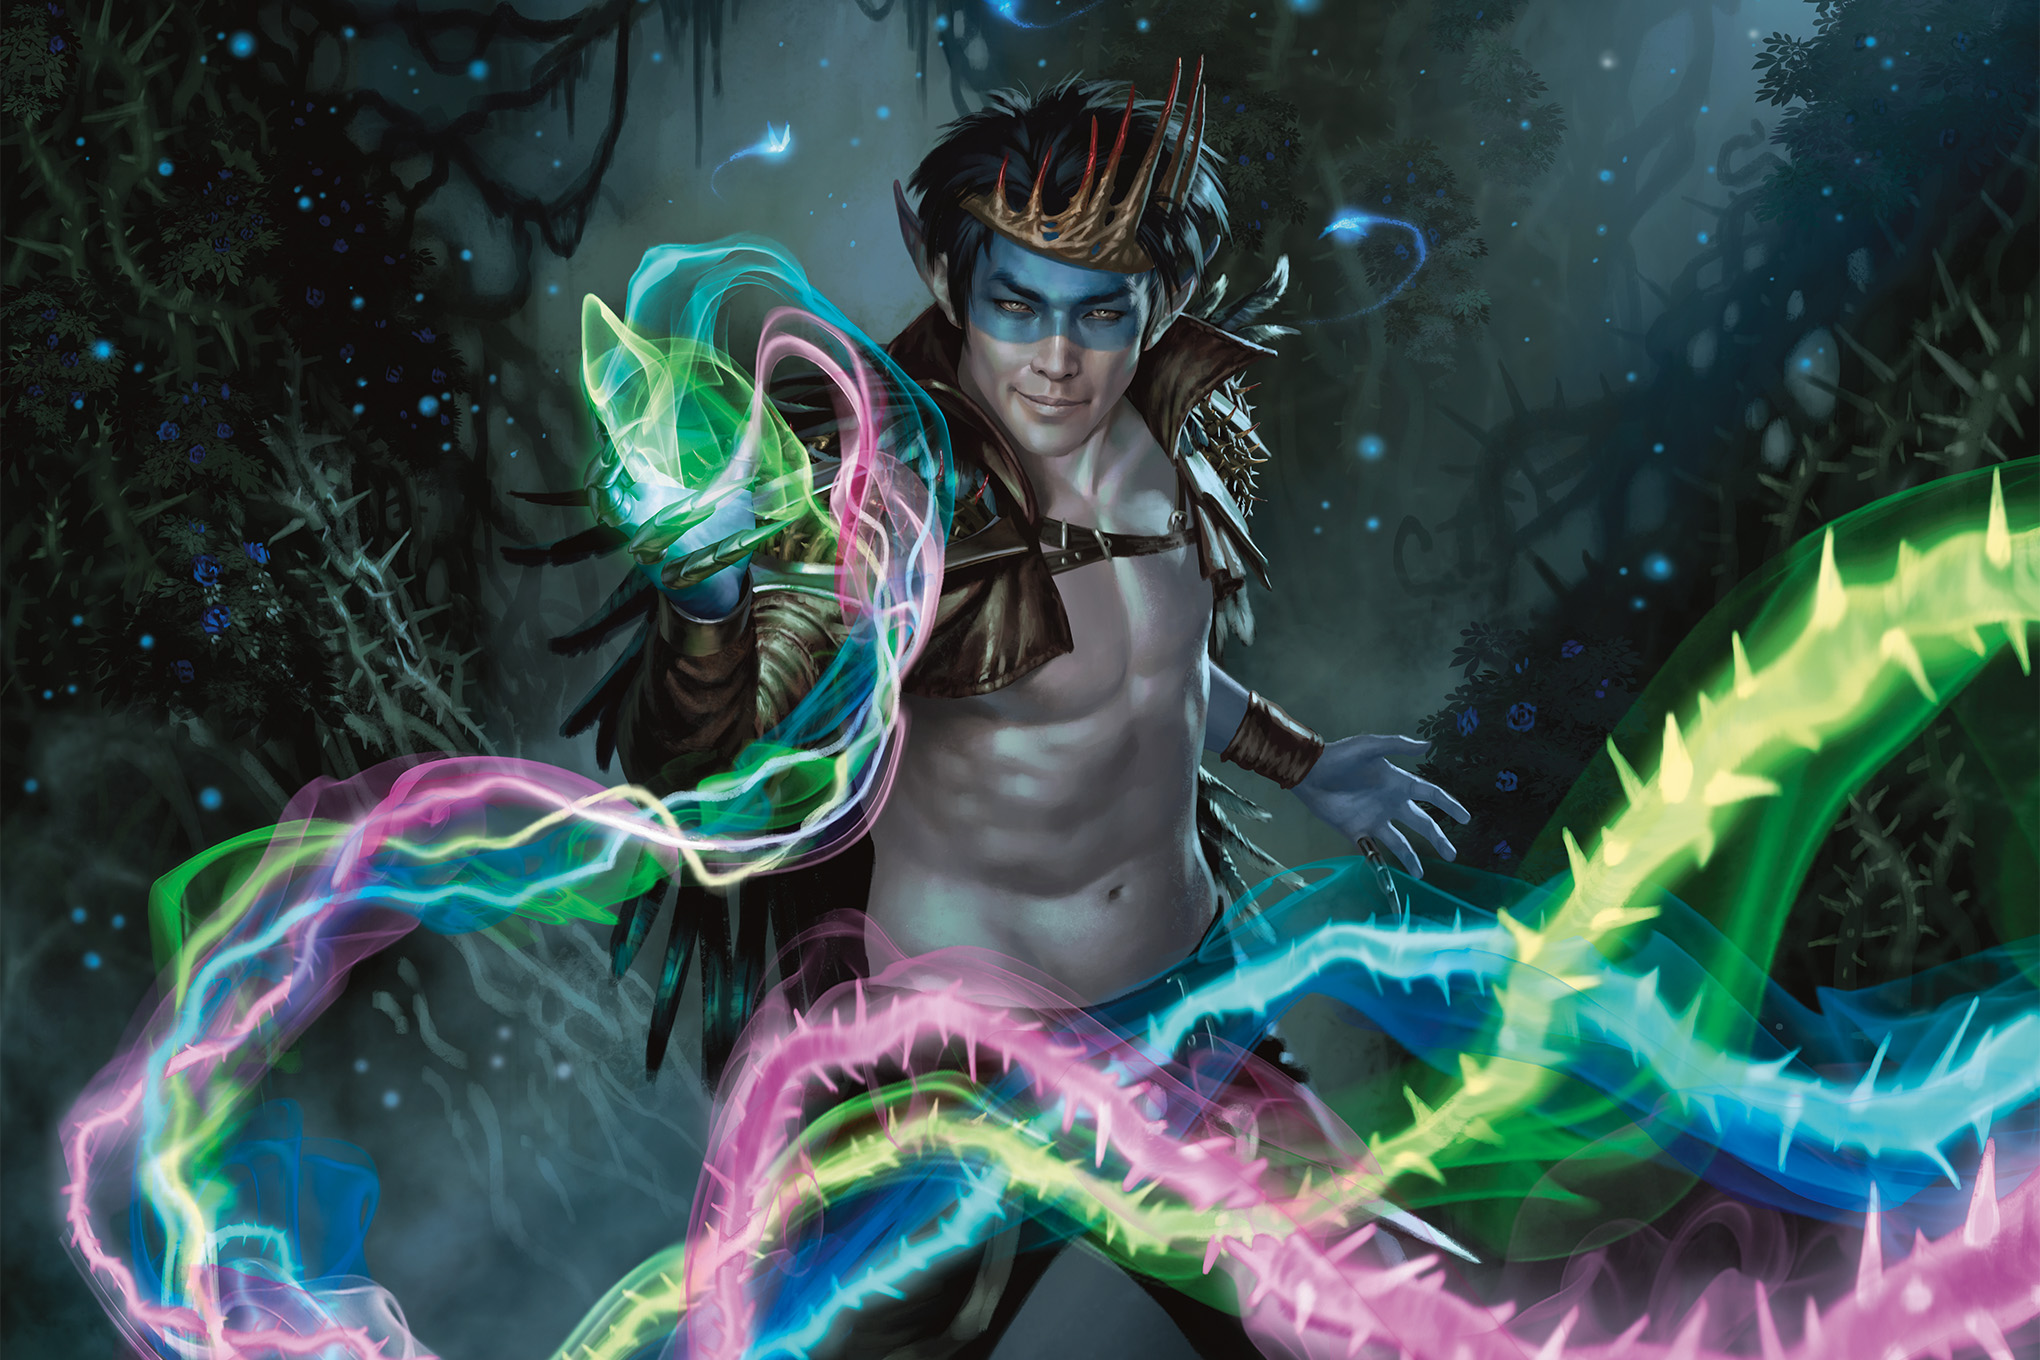 A Puck-like, pale-skinned humanoid nymph creature wearing a red crown — not unlike the MTG icon itself — wields a multicolored spell in official art from Magic: The Gathering’s Throne of Eldraine set.